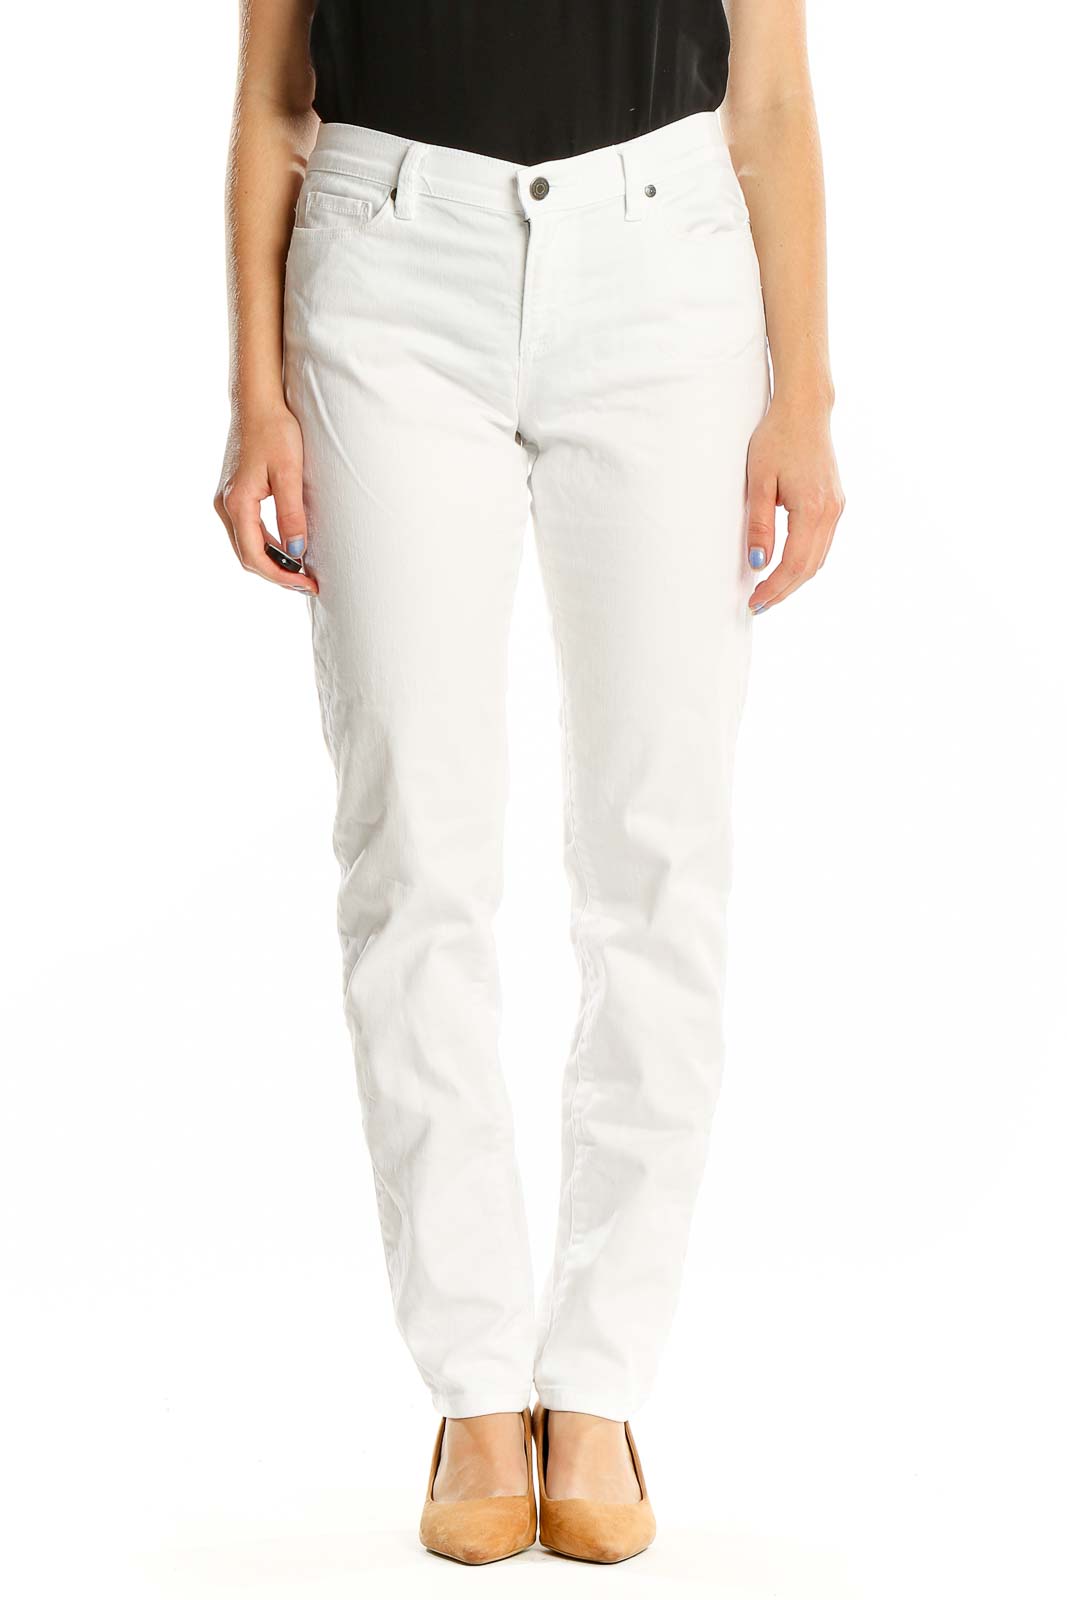 White Colored Jeans Front